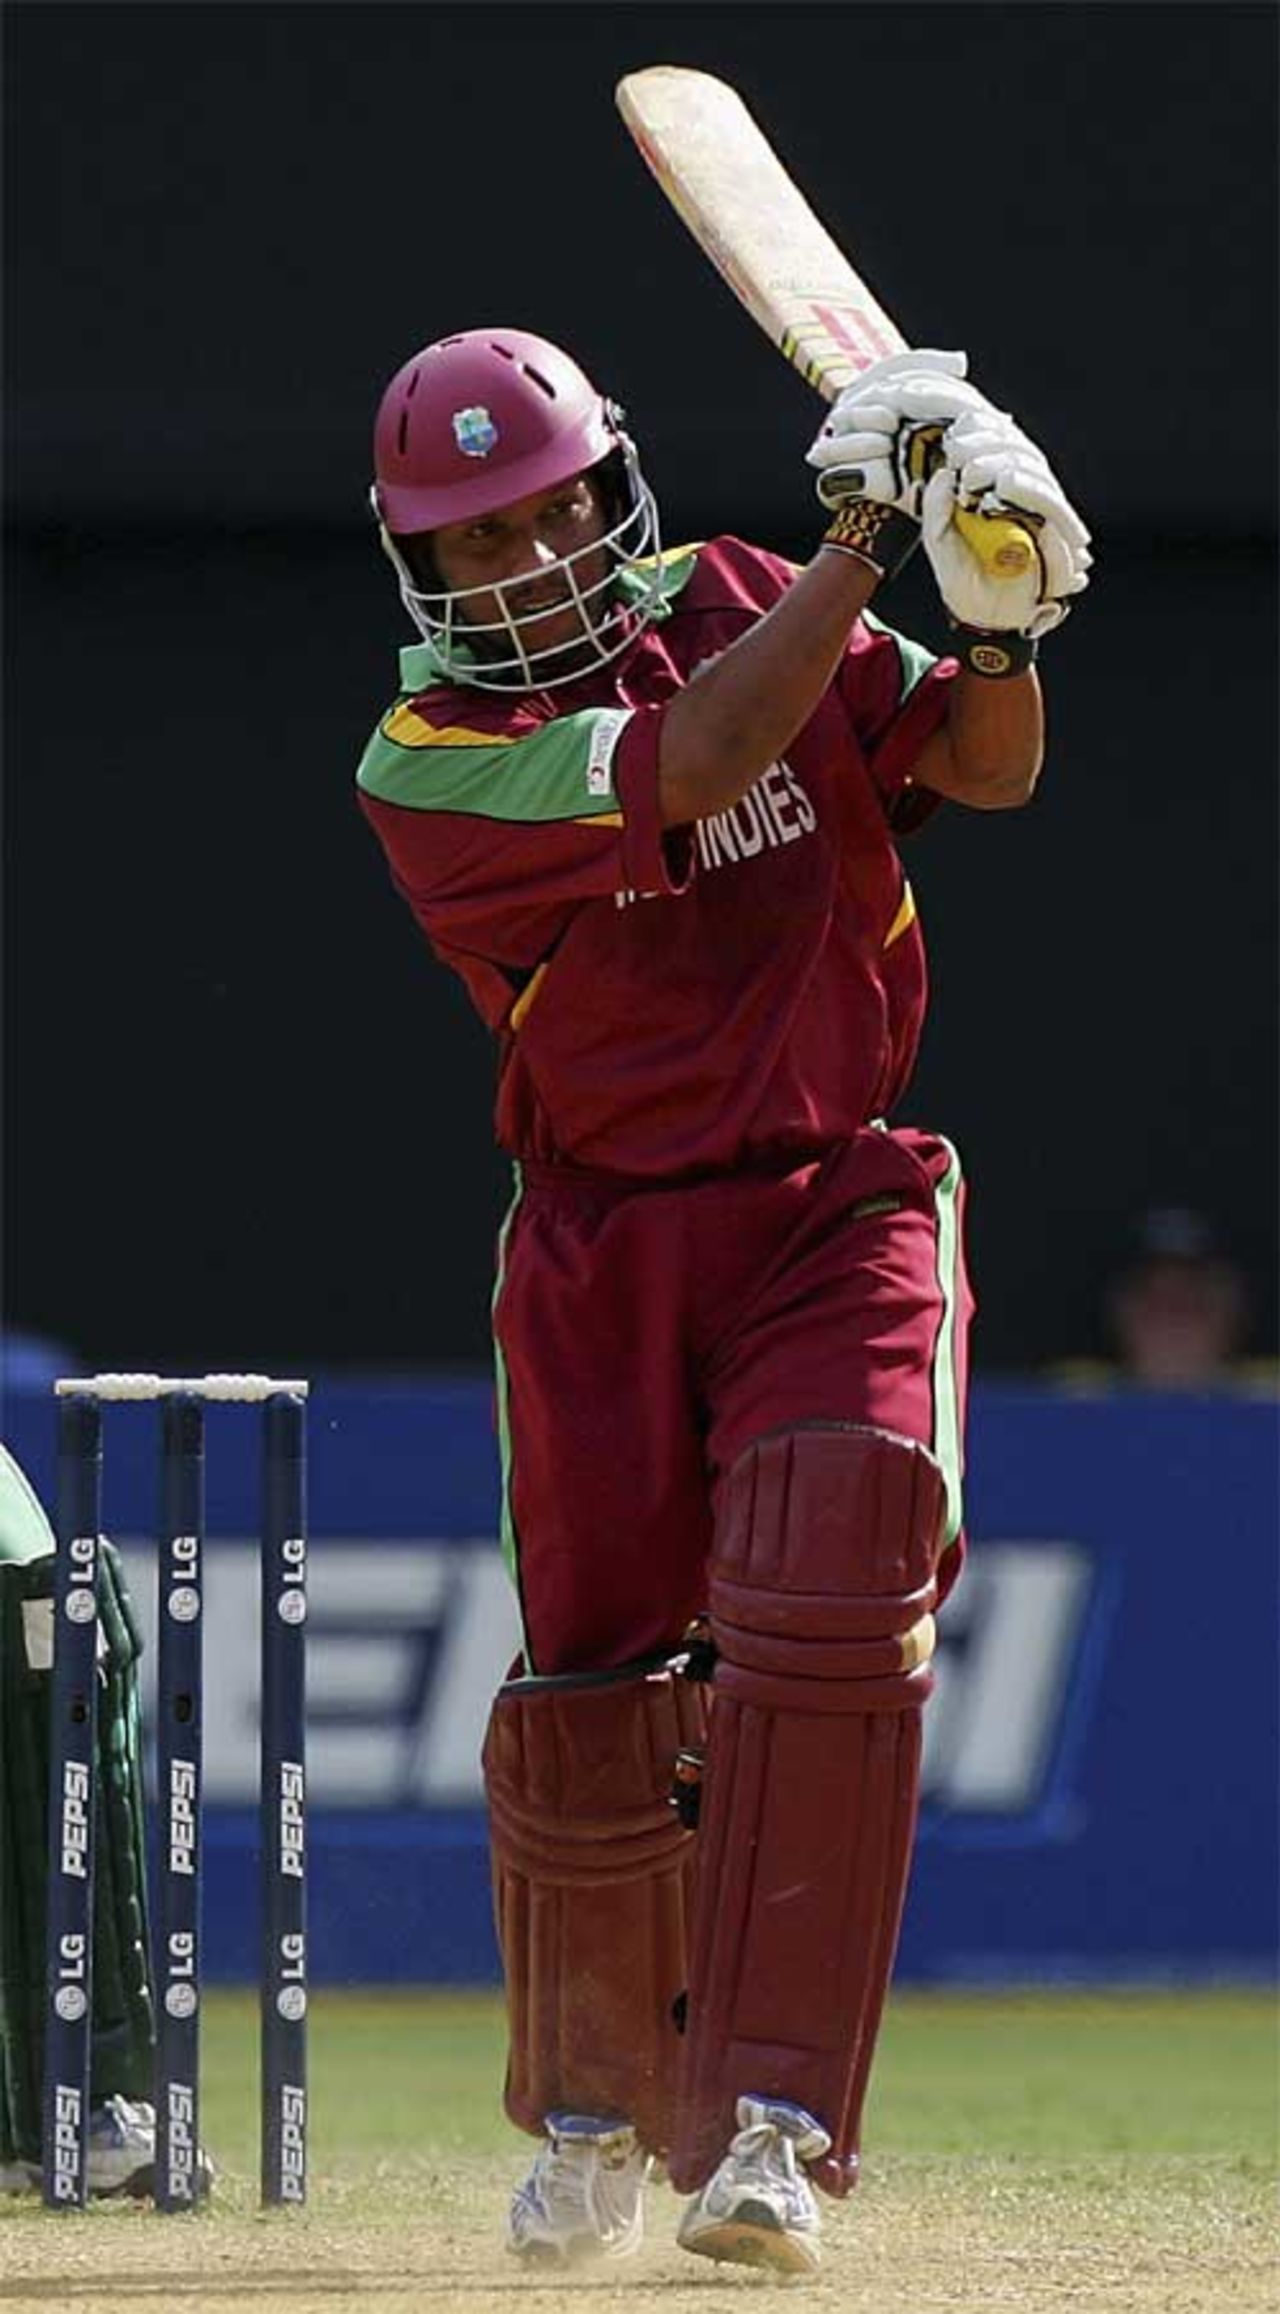 Ramnaresh Sarwan helps West Indies towards victory with a second-wicket century stand with Shivnarine Chanderpaul, West Indies v Ireland, Group D, Kingston, March 23, 2007